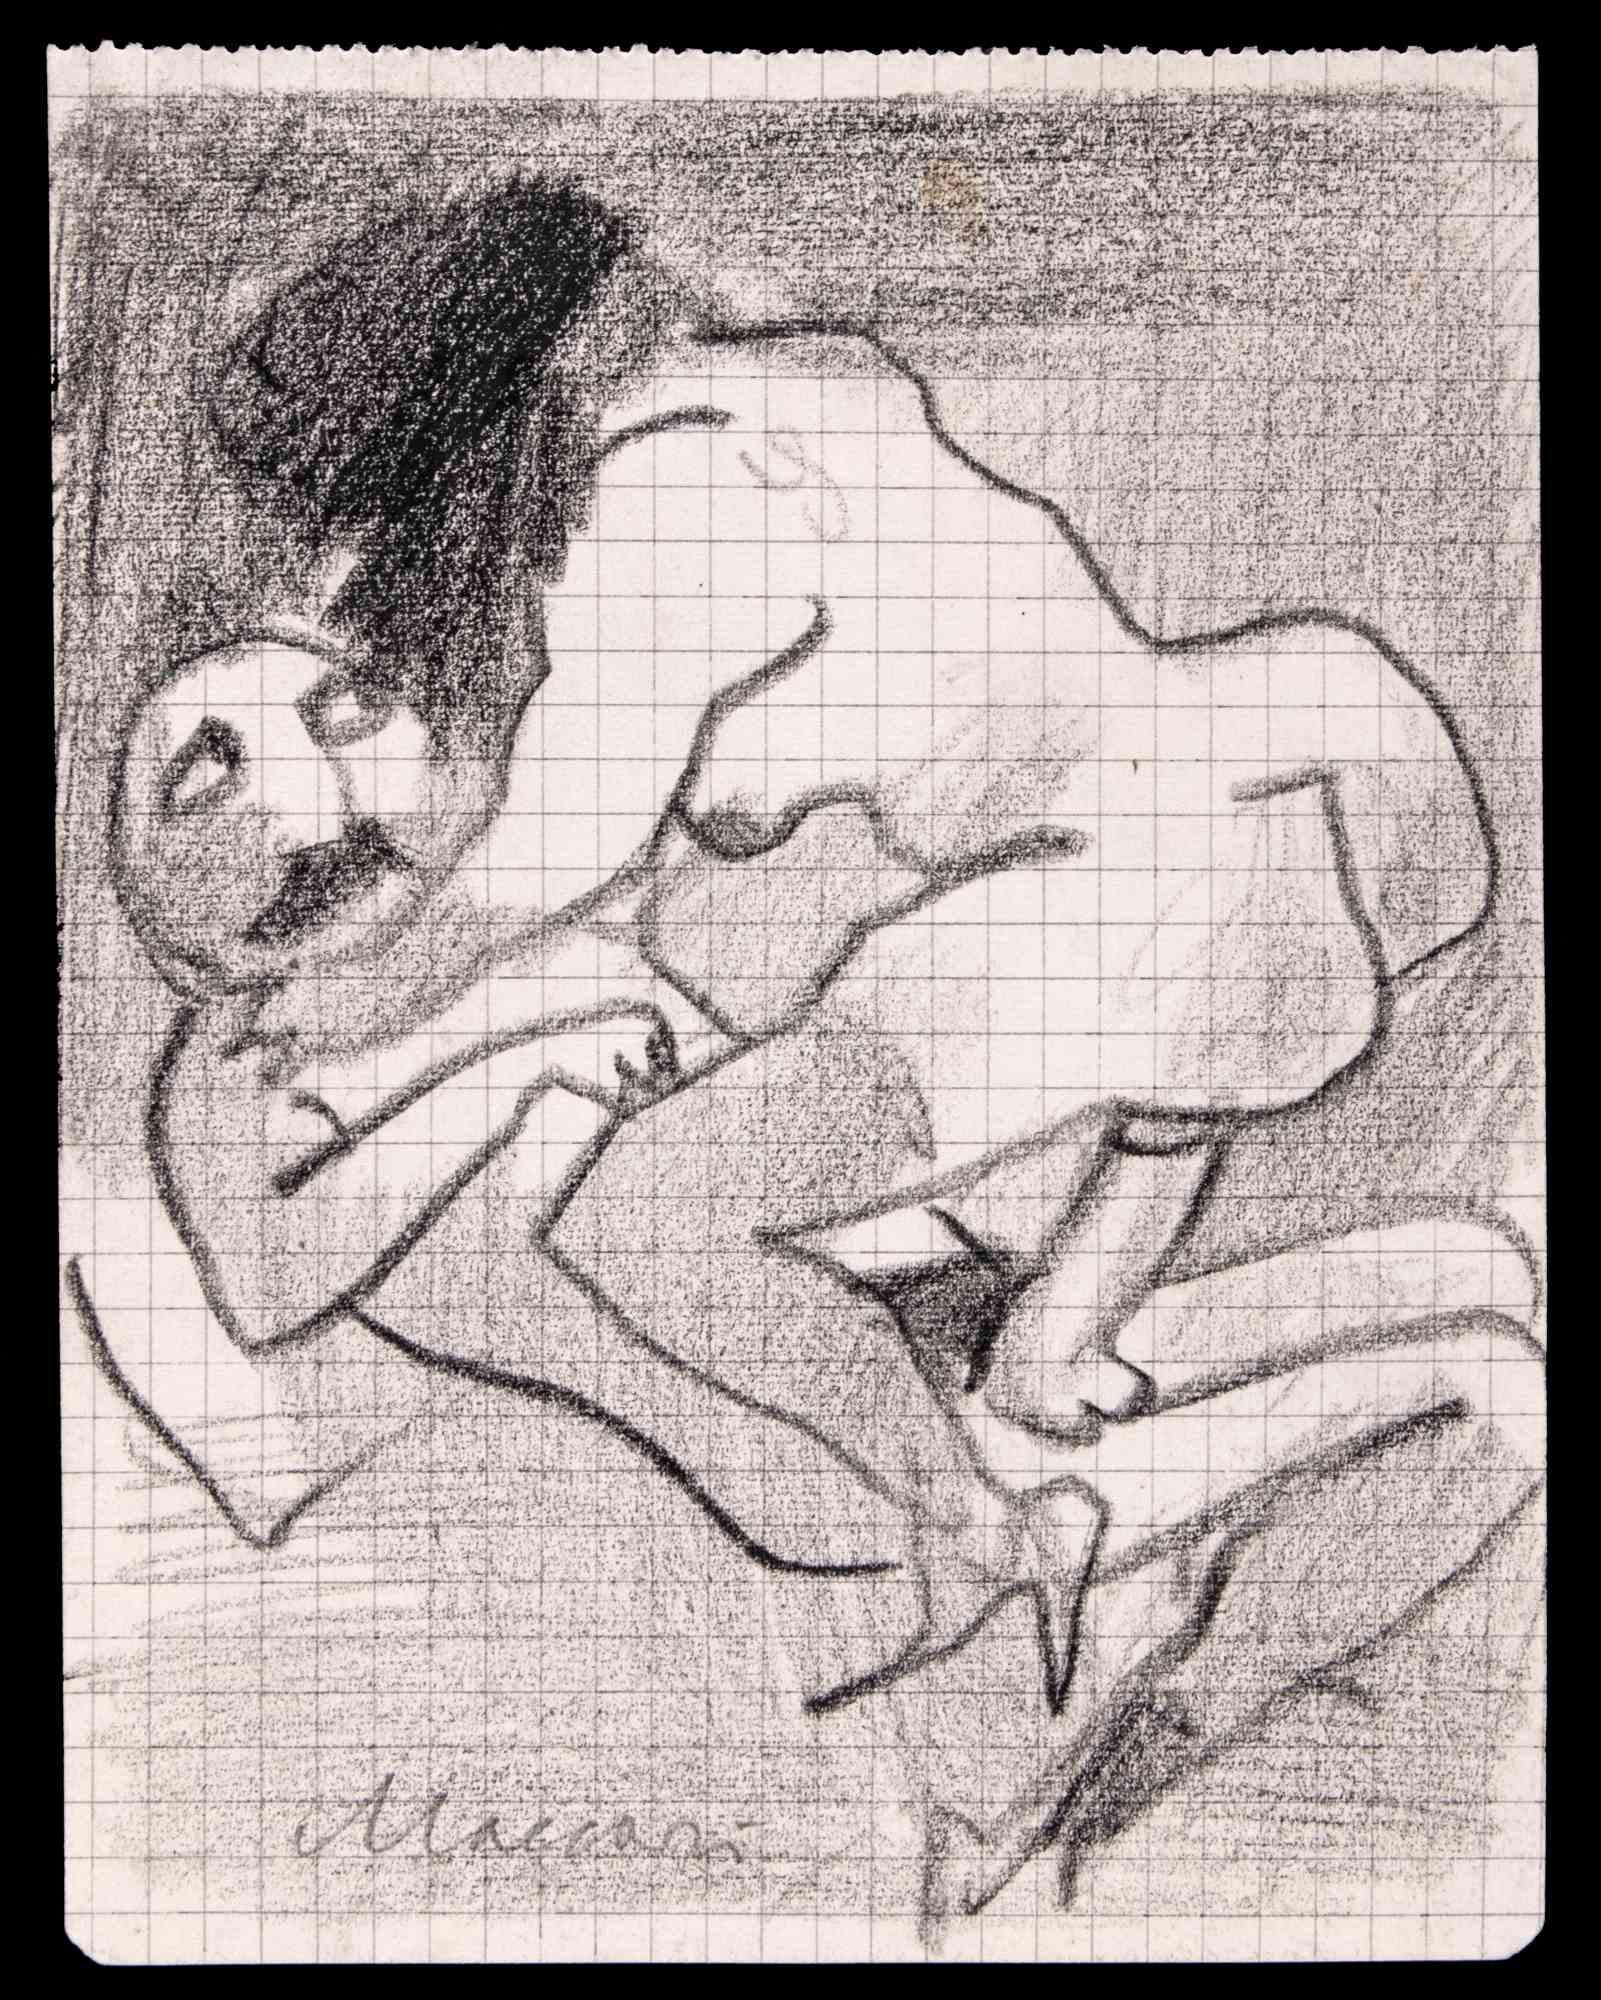 Erotic Scene is a charcoal Drawing realized by Mino Maccari in 1970.

Hand-signed on the lower margin.

Good condition on a graph paper.

Mino Maccari (Siena, 1924-Rome, June 16, 1989) was an Italian writer, painter, engraver and journalist, winner